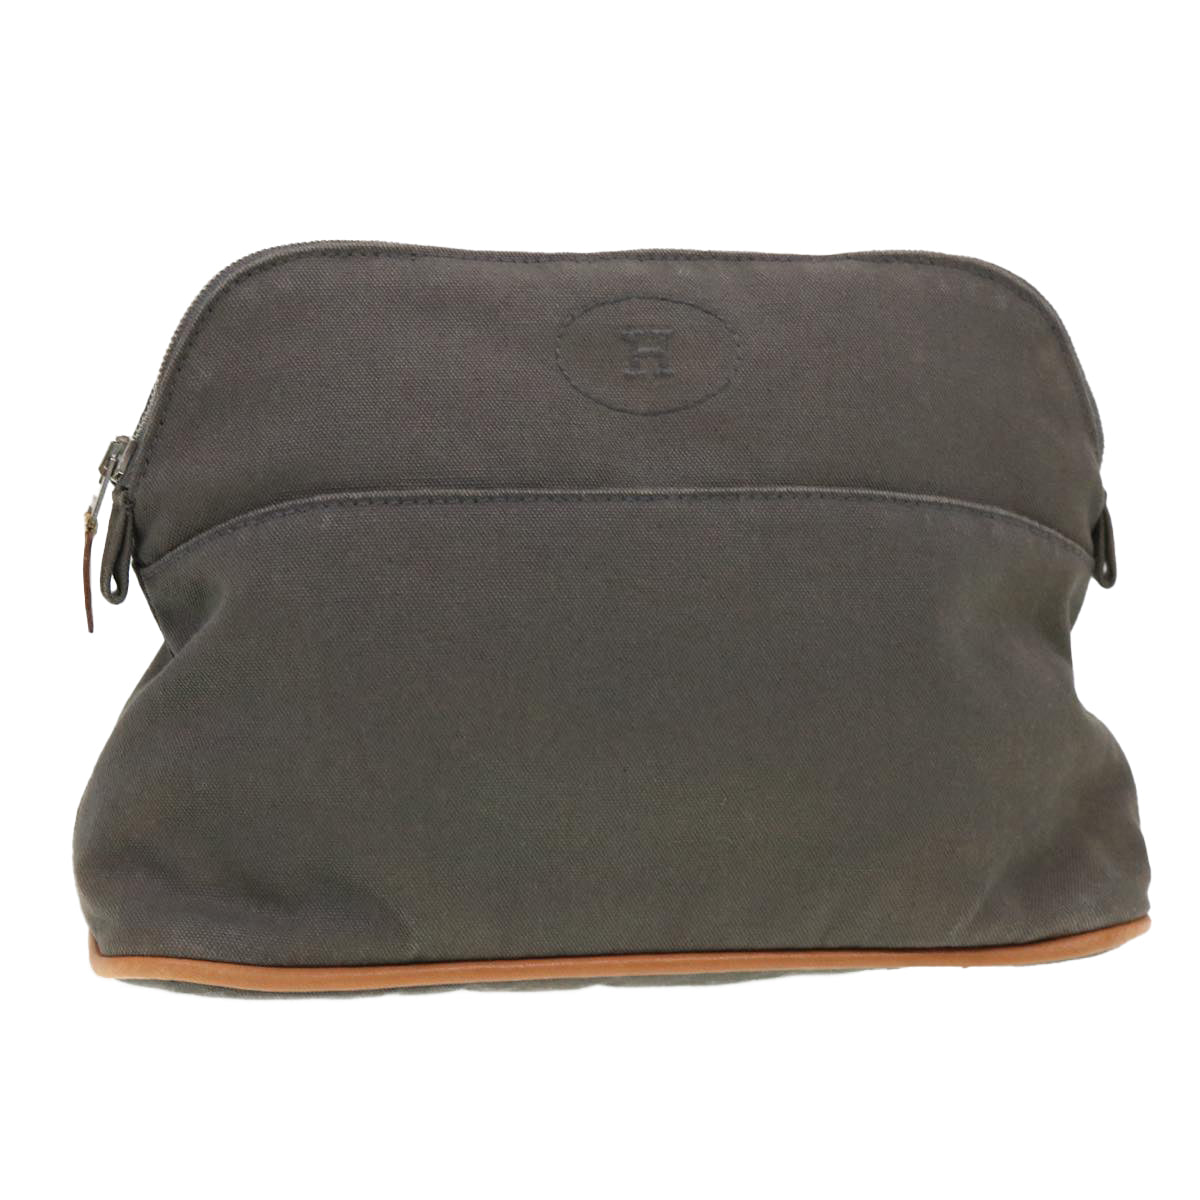 HERMES Pouch Canvas Gray Auth bs4551